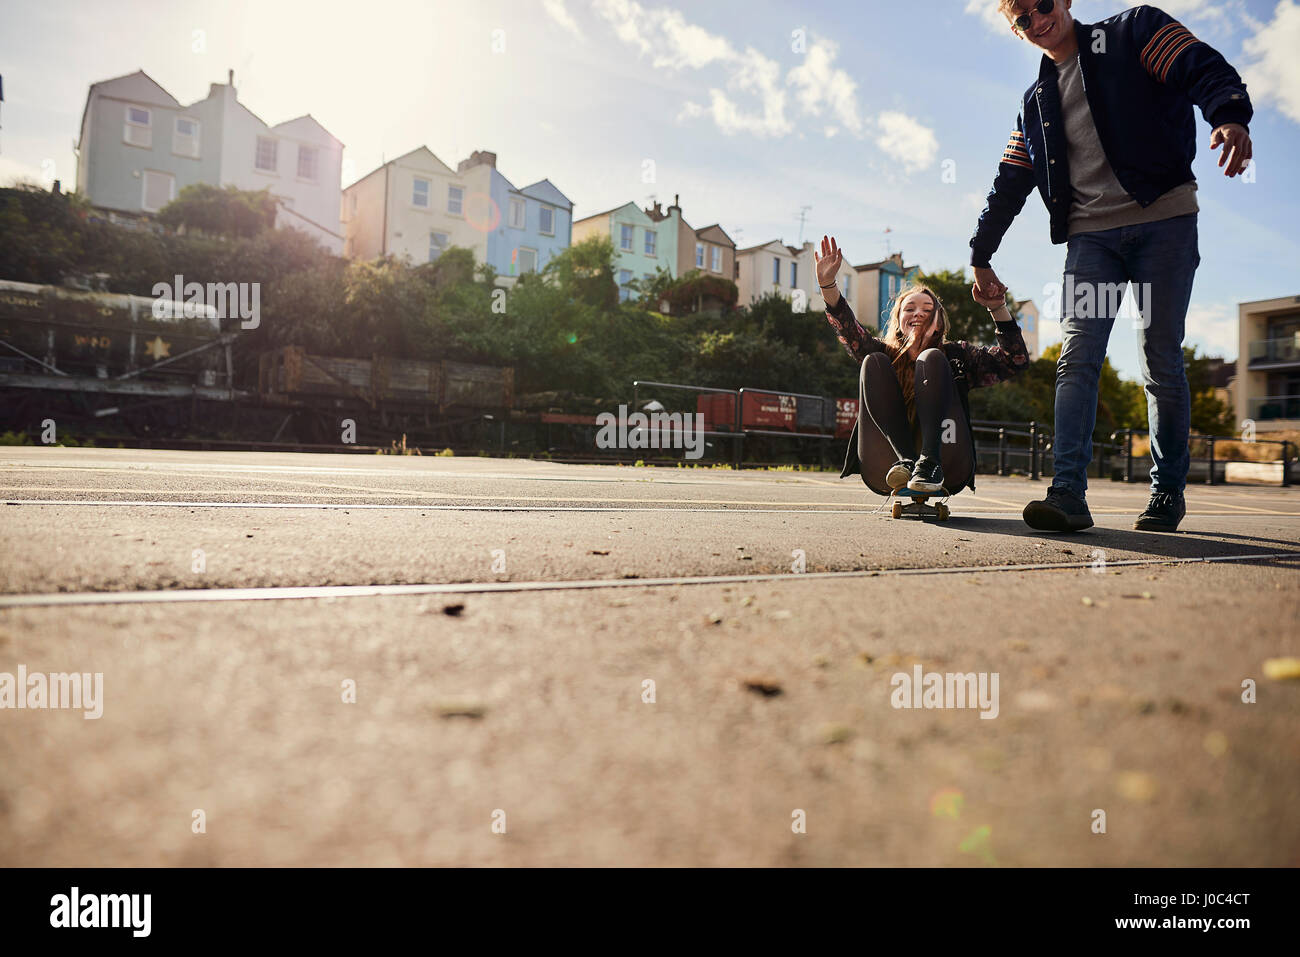 Two friends fooling around, young man pulling young woman along on skateboard, Bristol, UK Stock Photo